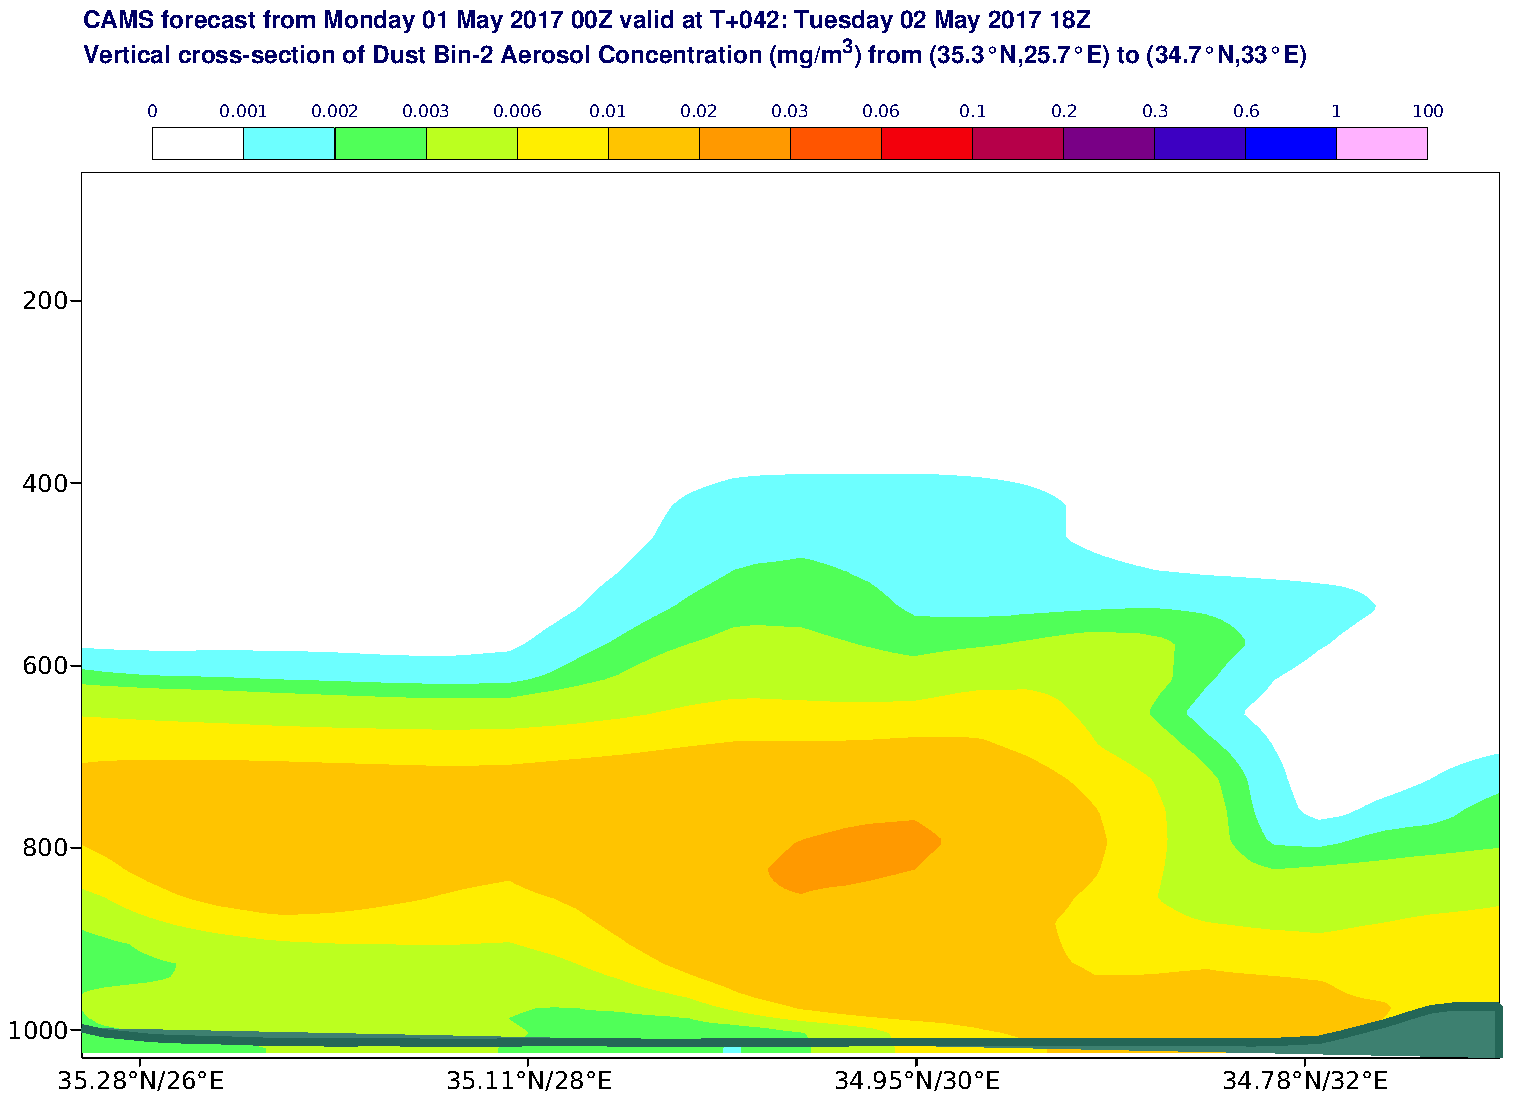 Vertical cross-section of Dust Bin-2 Aerosol Concentration (mg/m3) valid at T42 - 2017-05-02 18:00